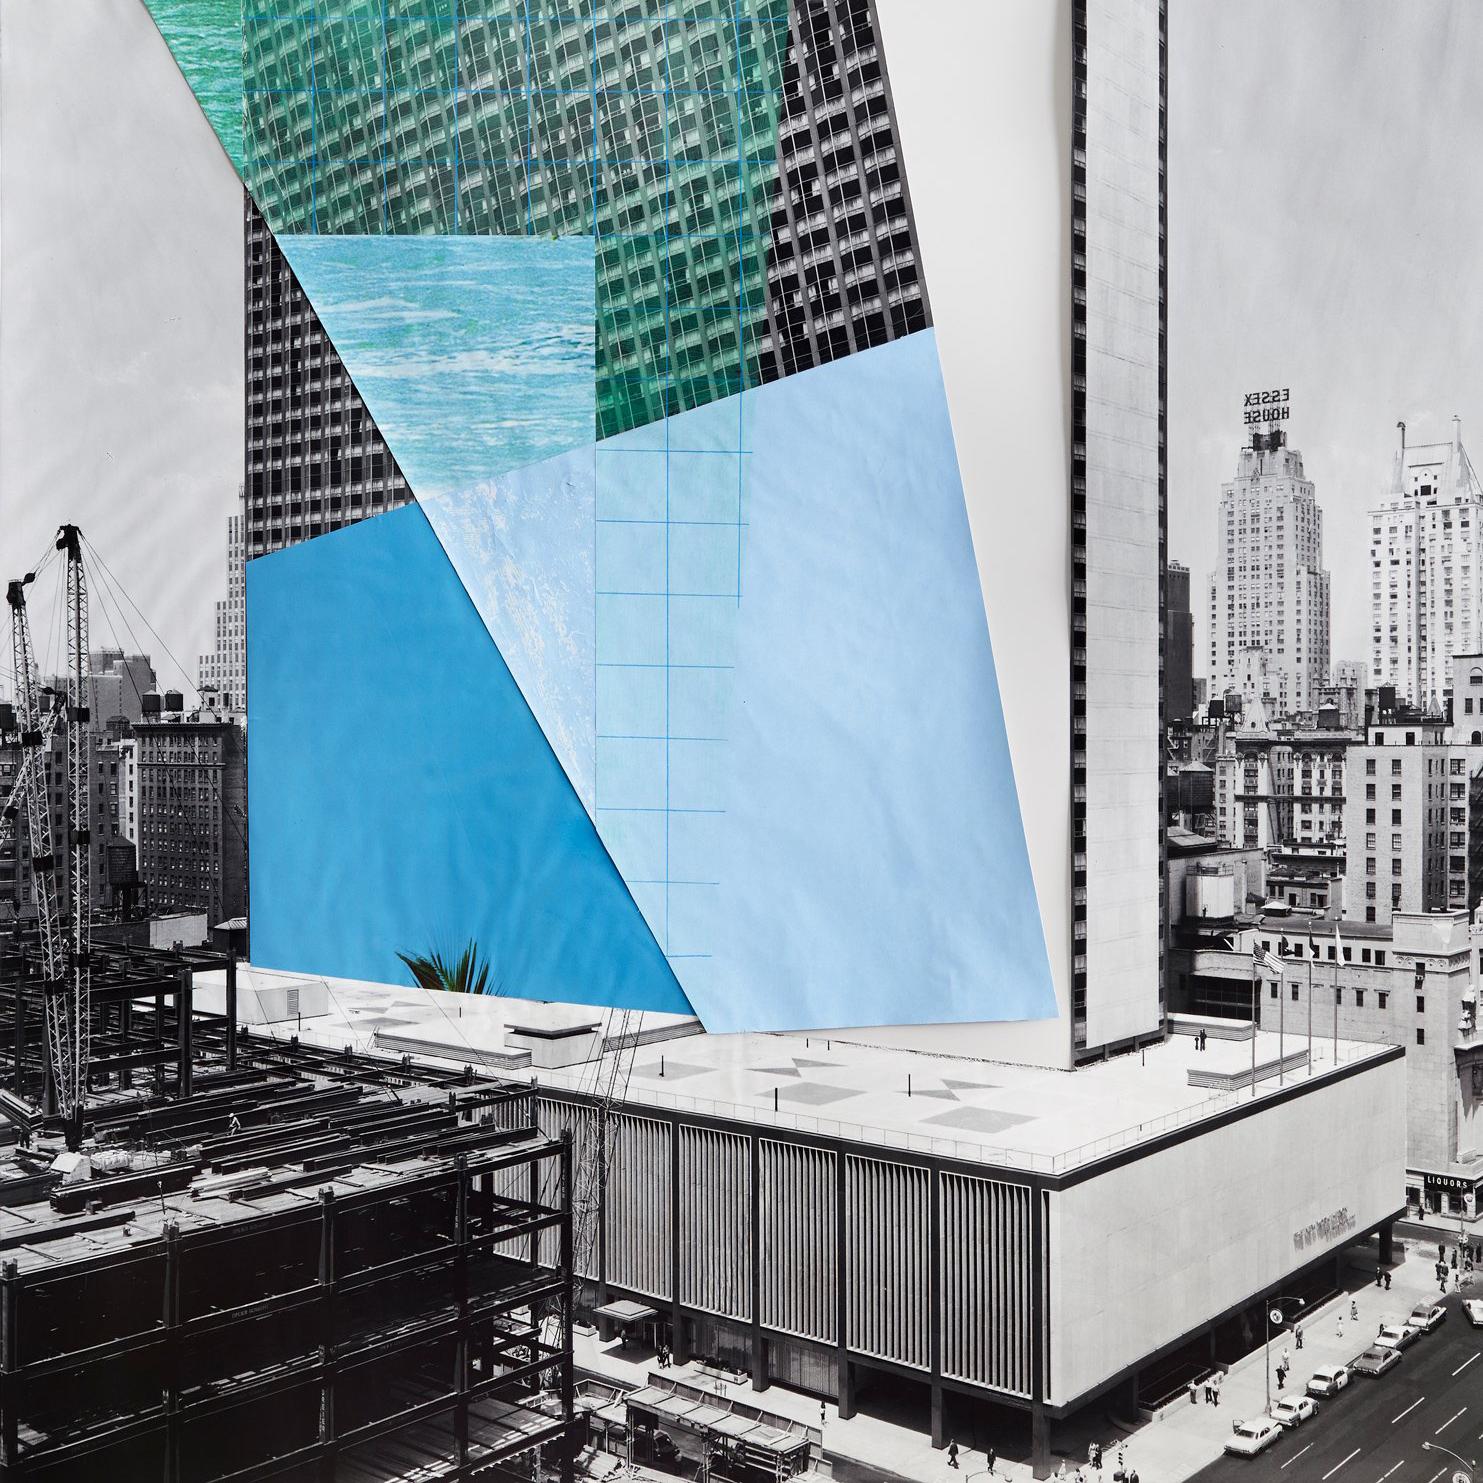 Facade 2, Architecture, New York, Color pencil and collage on digital print - Contemporary Mixed Media Art by Julie Boserup